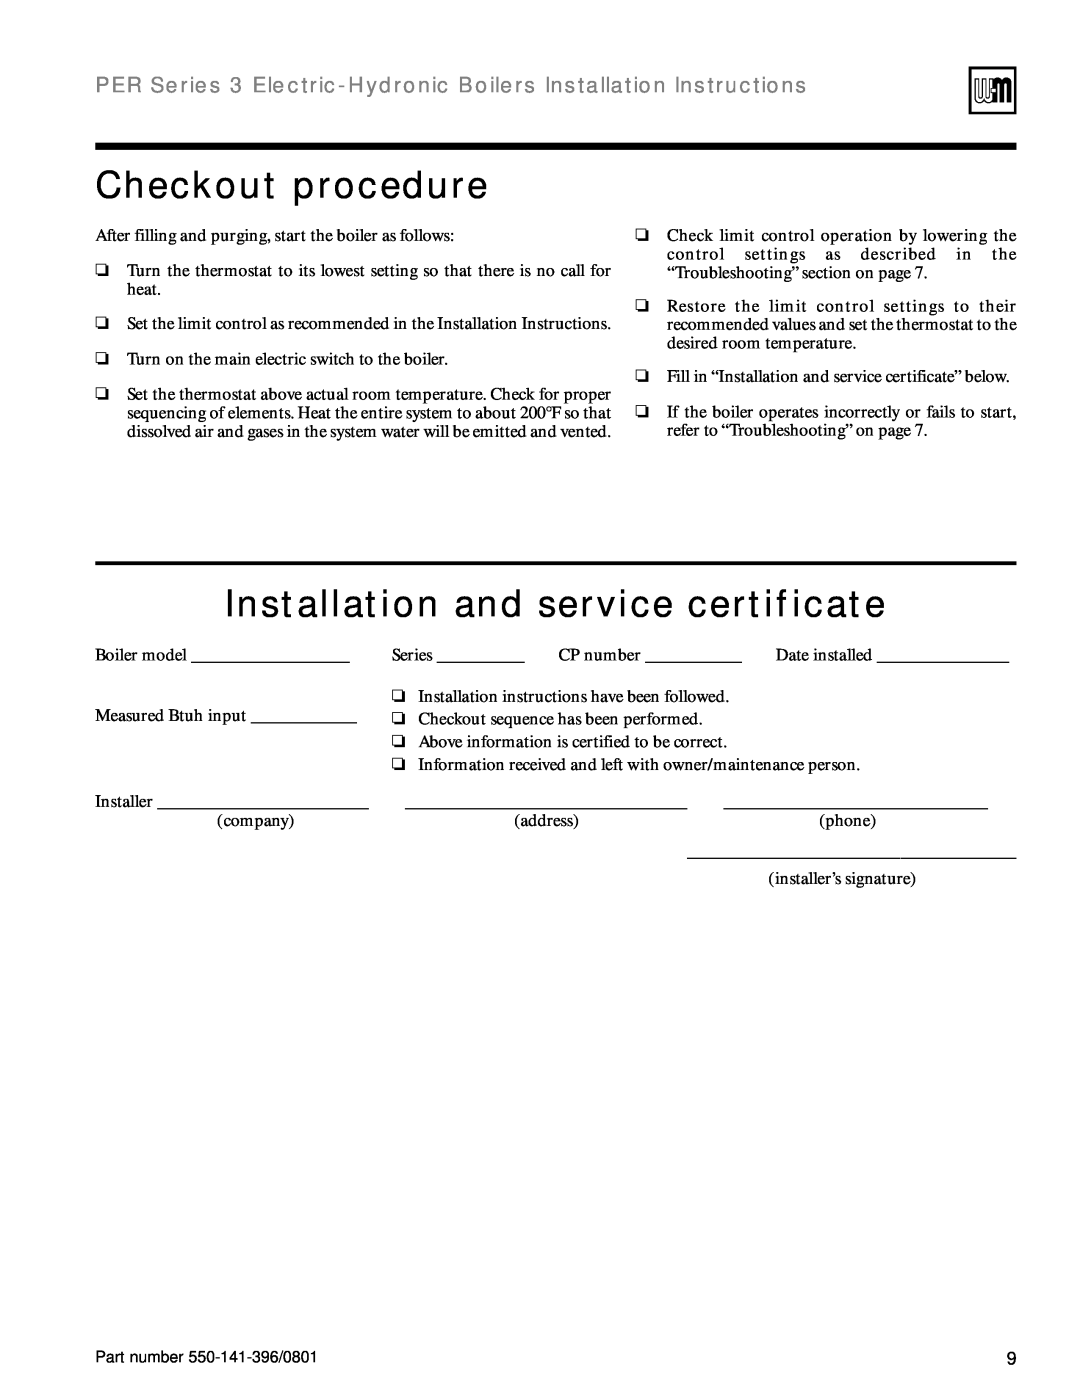 Weil-McLain 550-141-396/0801 installation instructions Checkout procedure, Installation and service certificate 